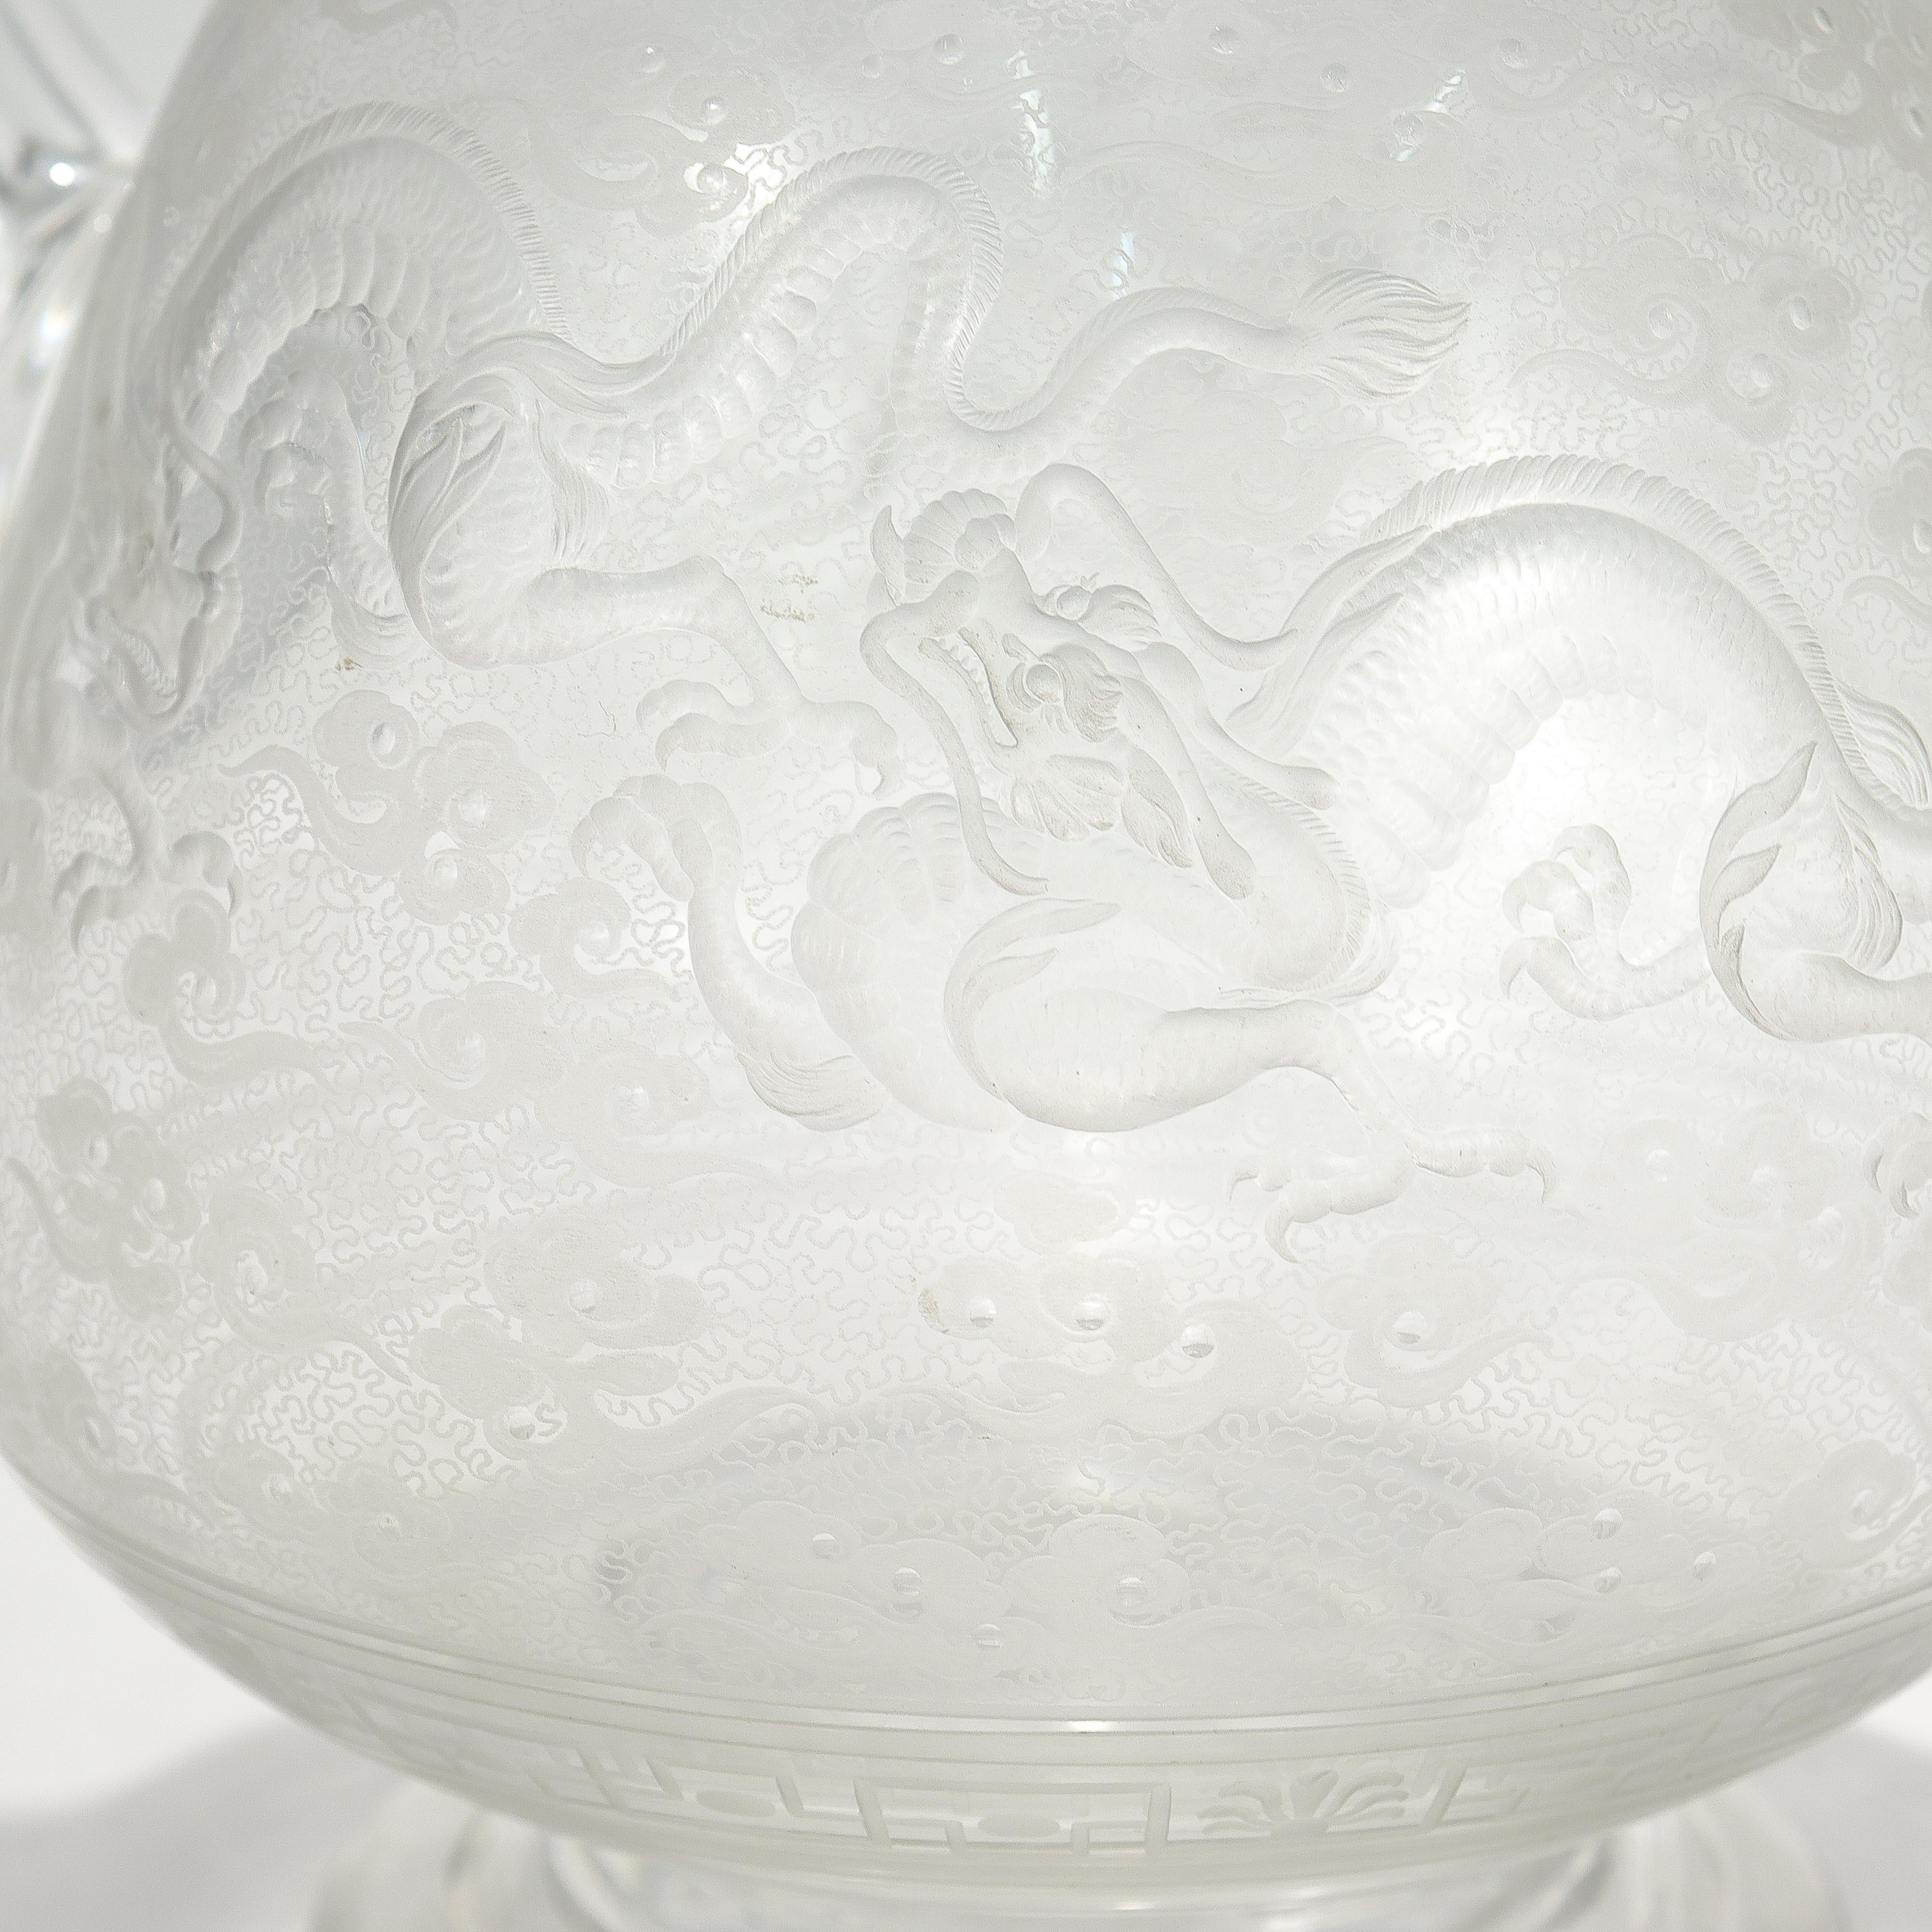 Antique Kny Attributed Stourbridge Engraved Glass Pitcher with Chinese Dragons For Sale 3